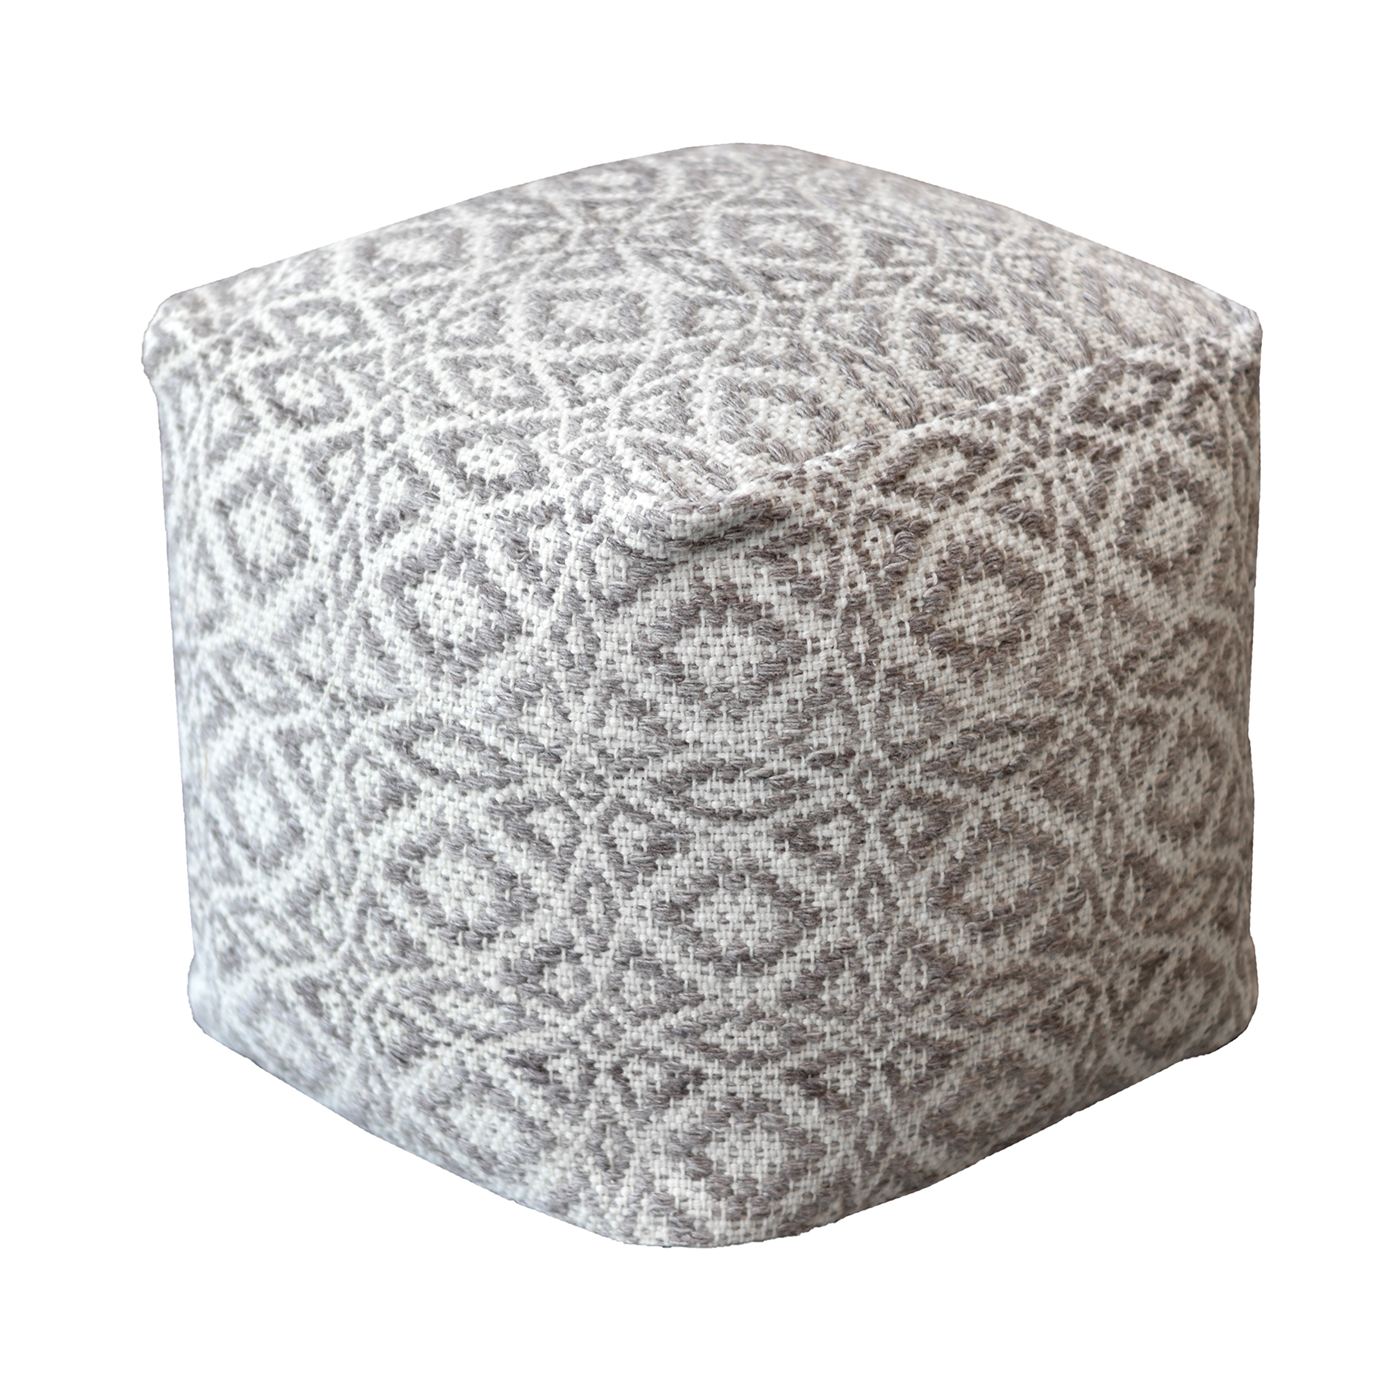 Maderia Pouf, Pet, Taupe, PITLOOM / FLAT WEAVE